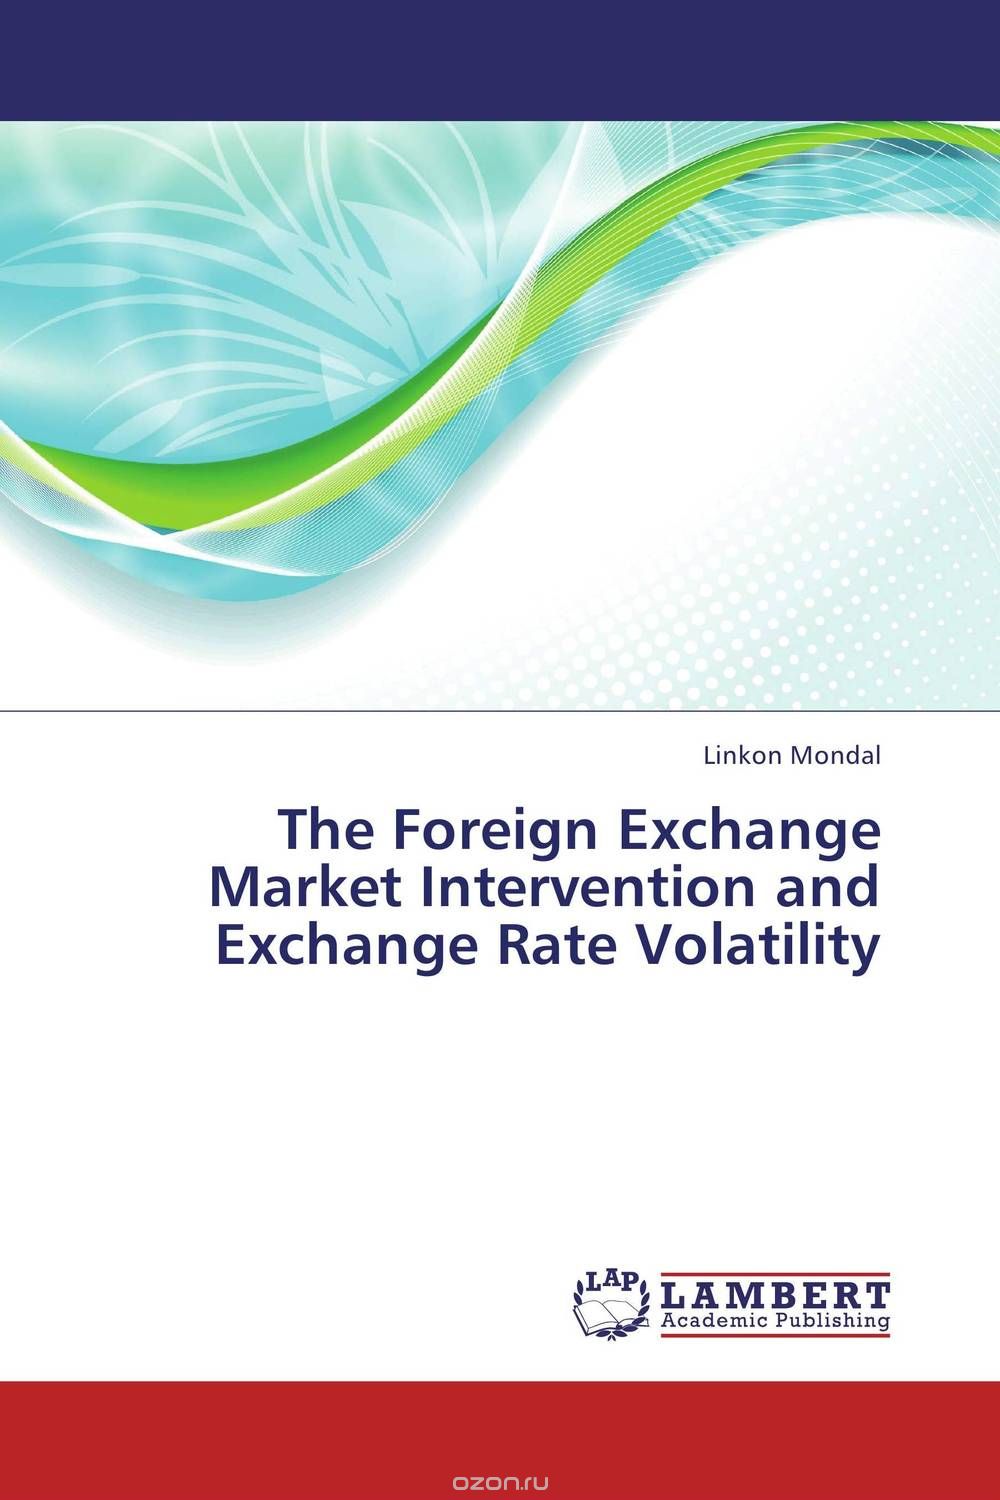 The Foreign Exchange Market Intervention and Exchange Rate Volatility